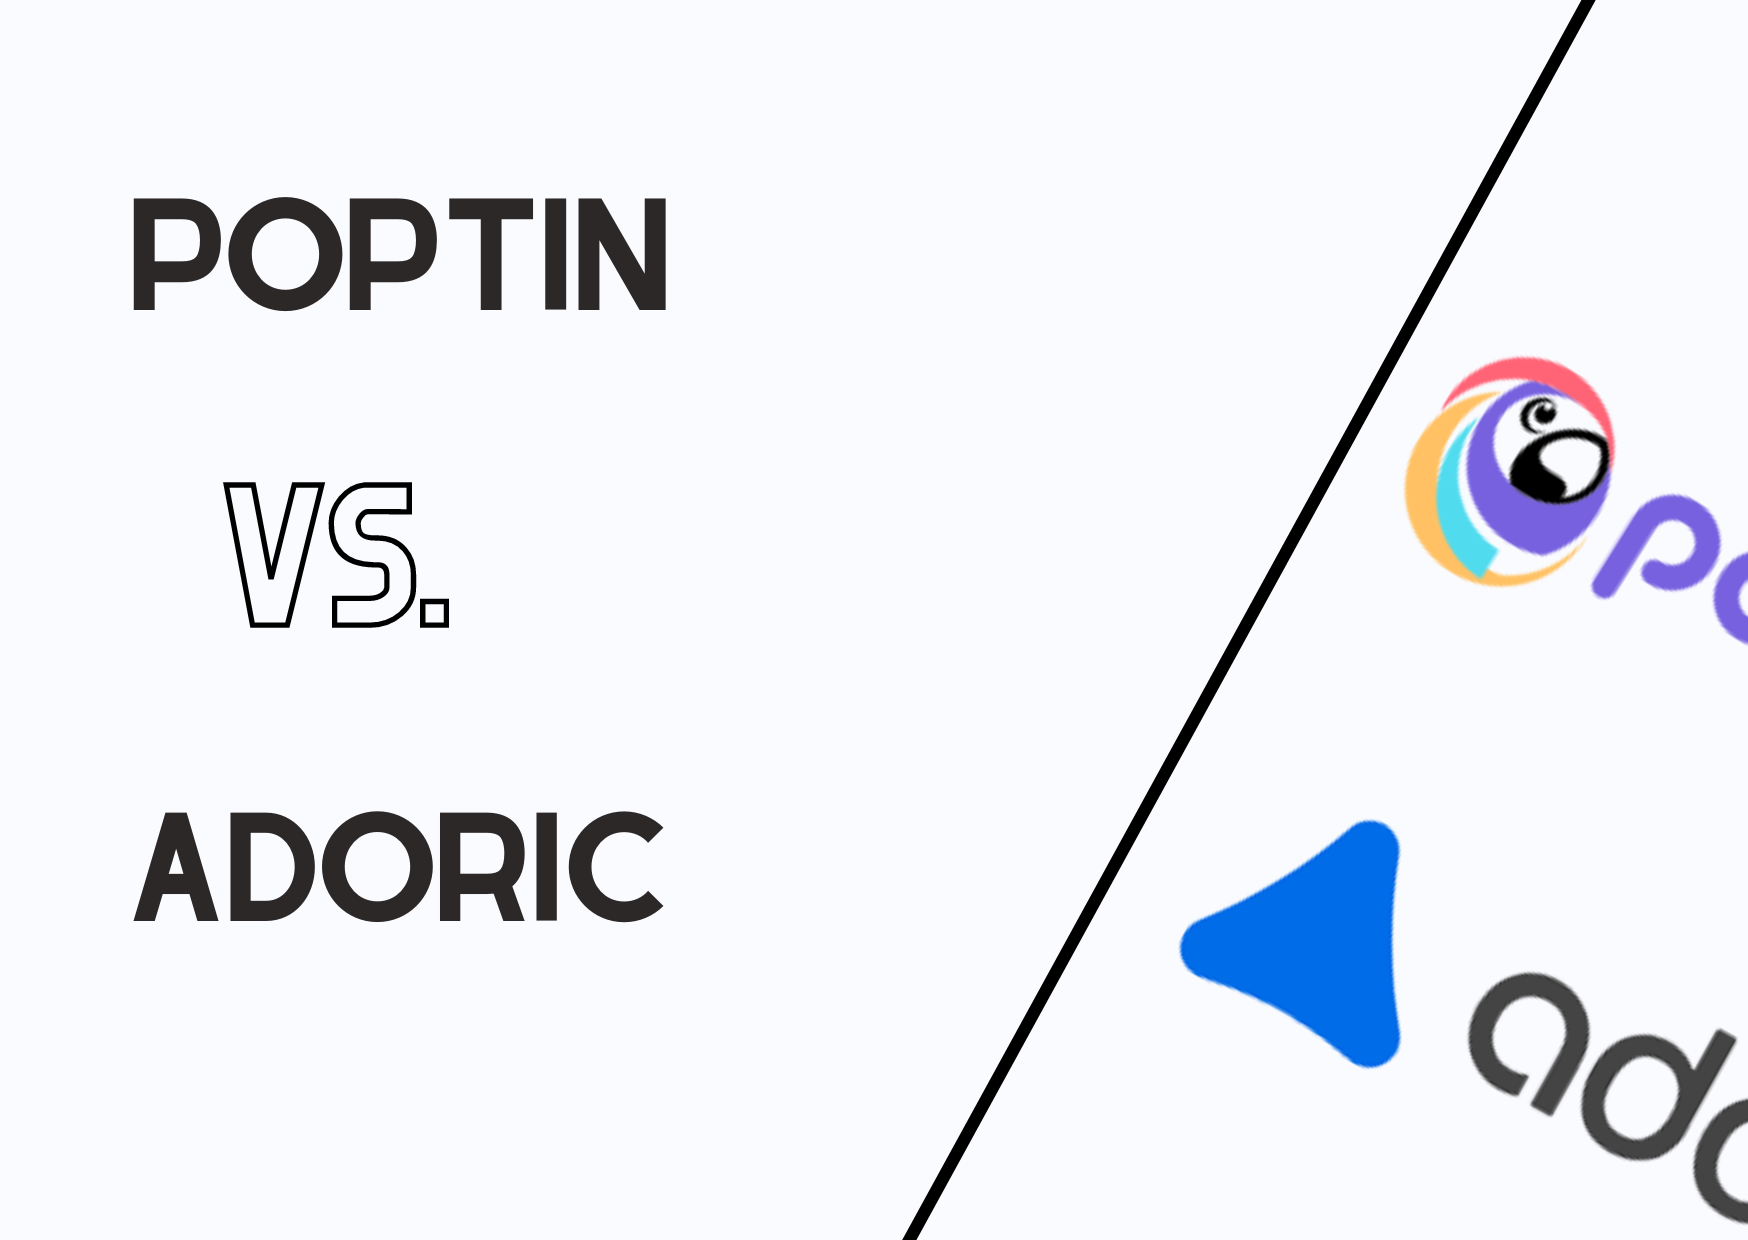 the Poptin and Adoric logos to compare their features